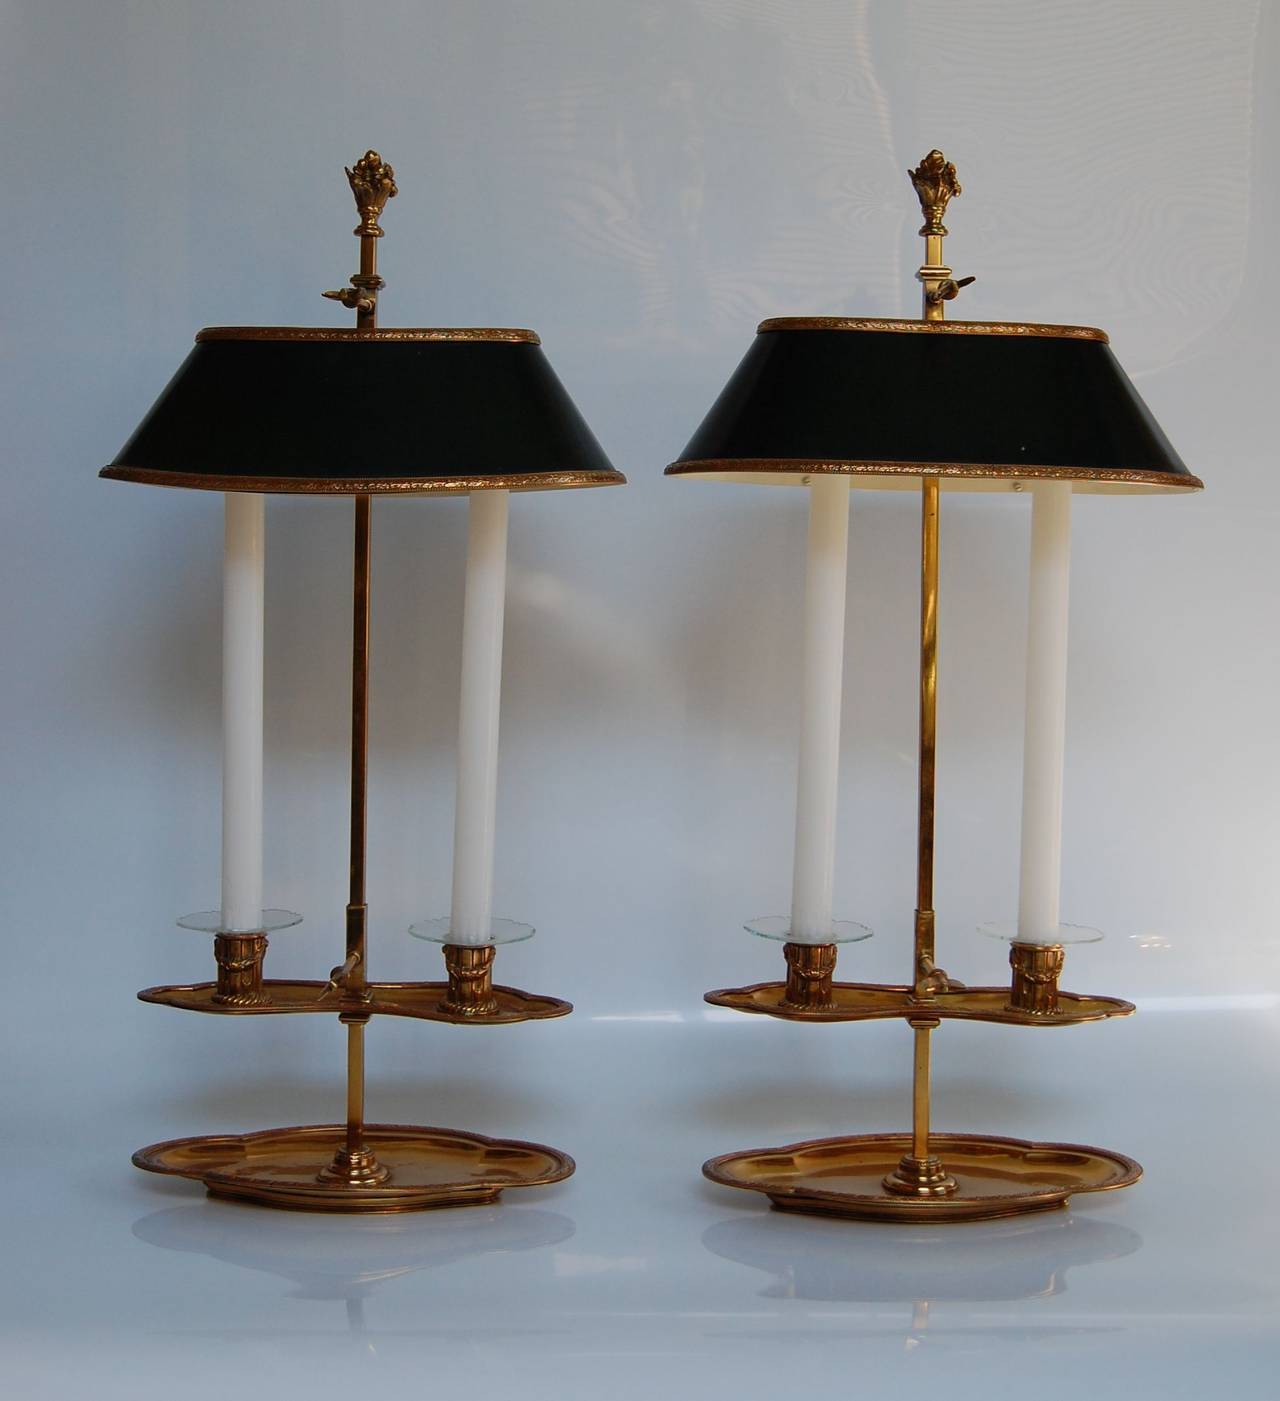 Pair of bouillote candle lamps stamped "Bagues" in mint condition, likely 19th century. These were purchased in the mid 1960's at A La Vieille Russie in New York City. 